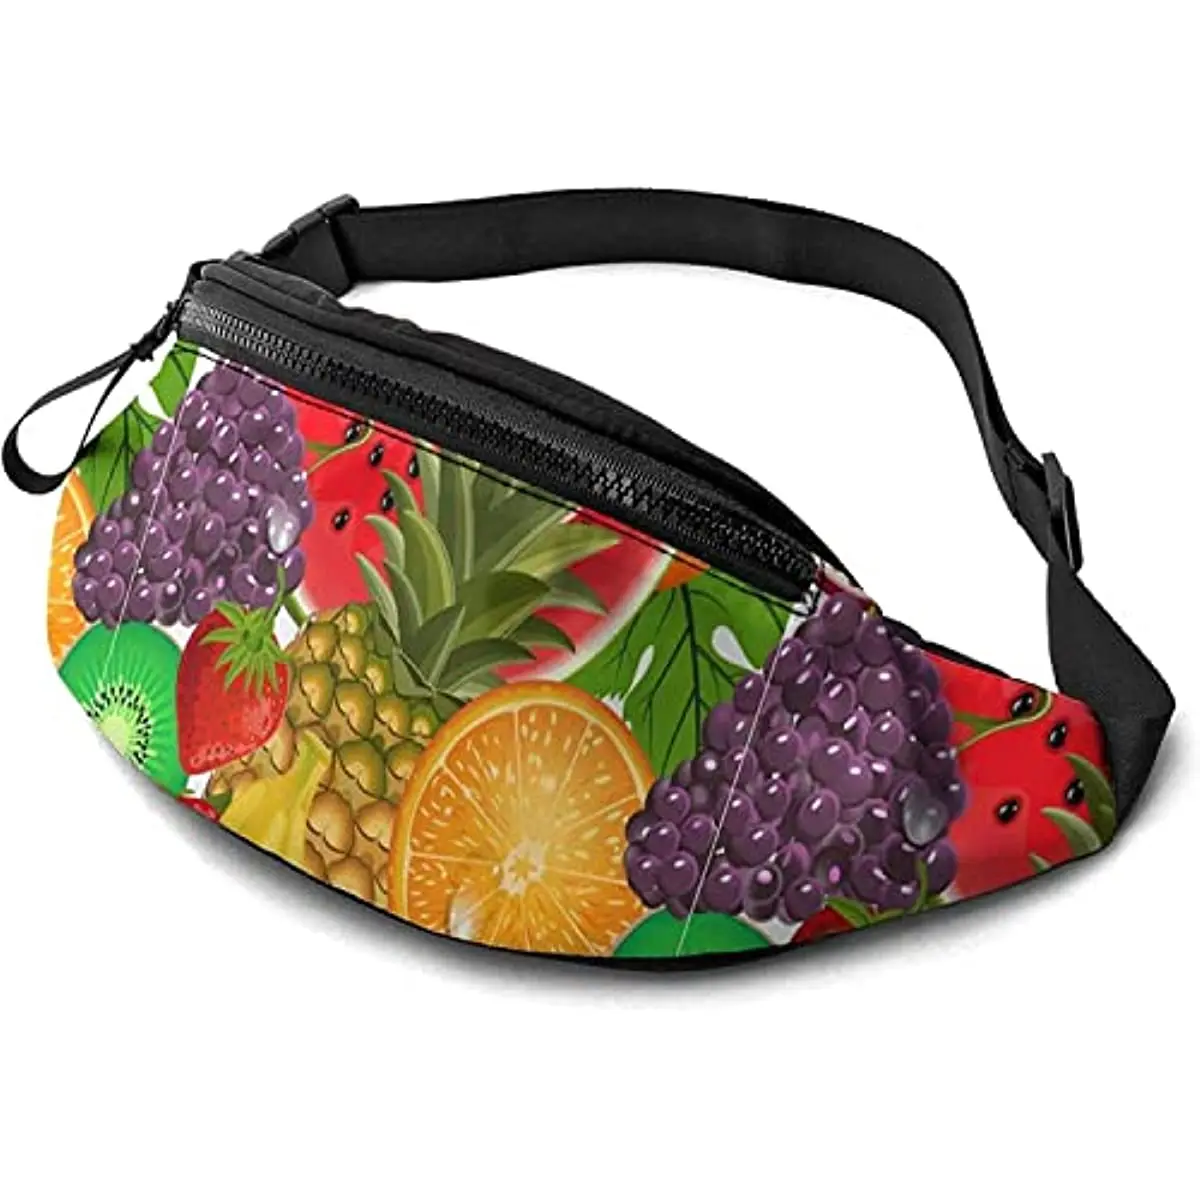 

Juicy Fruit Fanny Pack Waist Bags for Women Men Casual Belt Bag Crossbody Bum Bag with Adjustable Strap for Outdoors Running